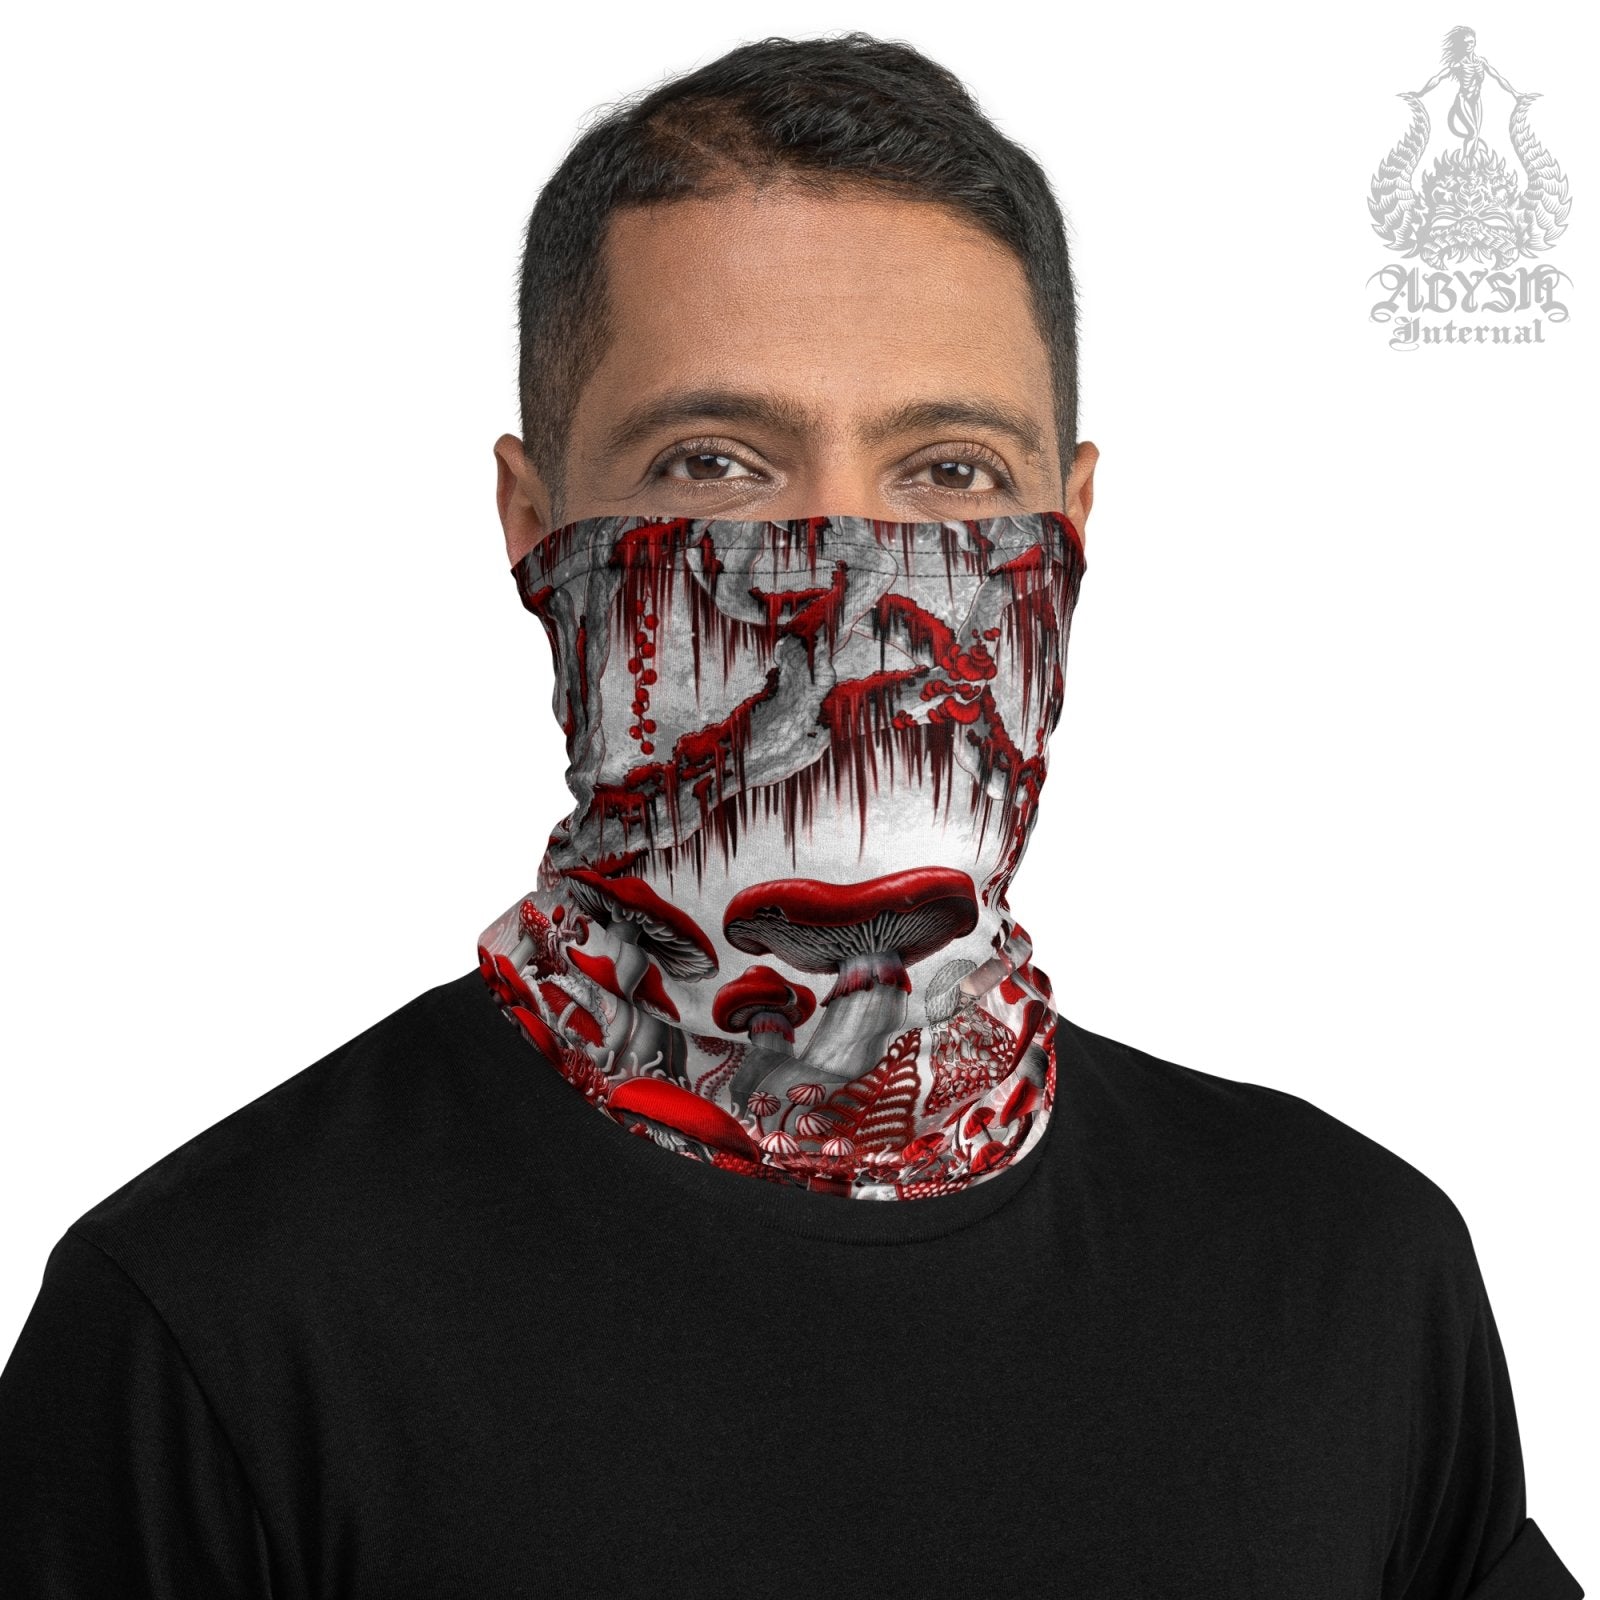 Gothic Mushrooms Neck Gaiter, White Goth Face Mask, Head Covering, Magic Shrooms Art, Indie Festival Outfit, Mycologyst Gift - Bloody Red - Abysm Internal